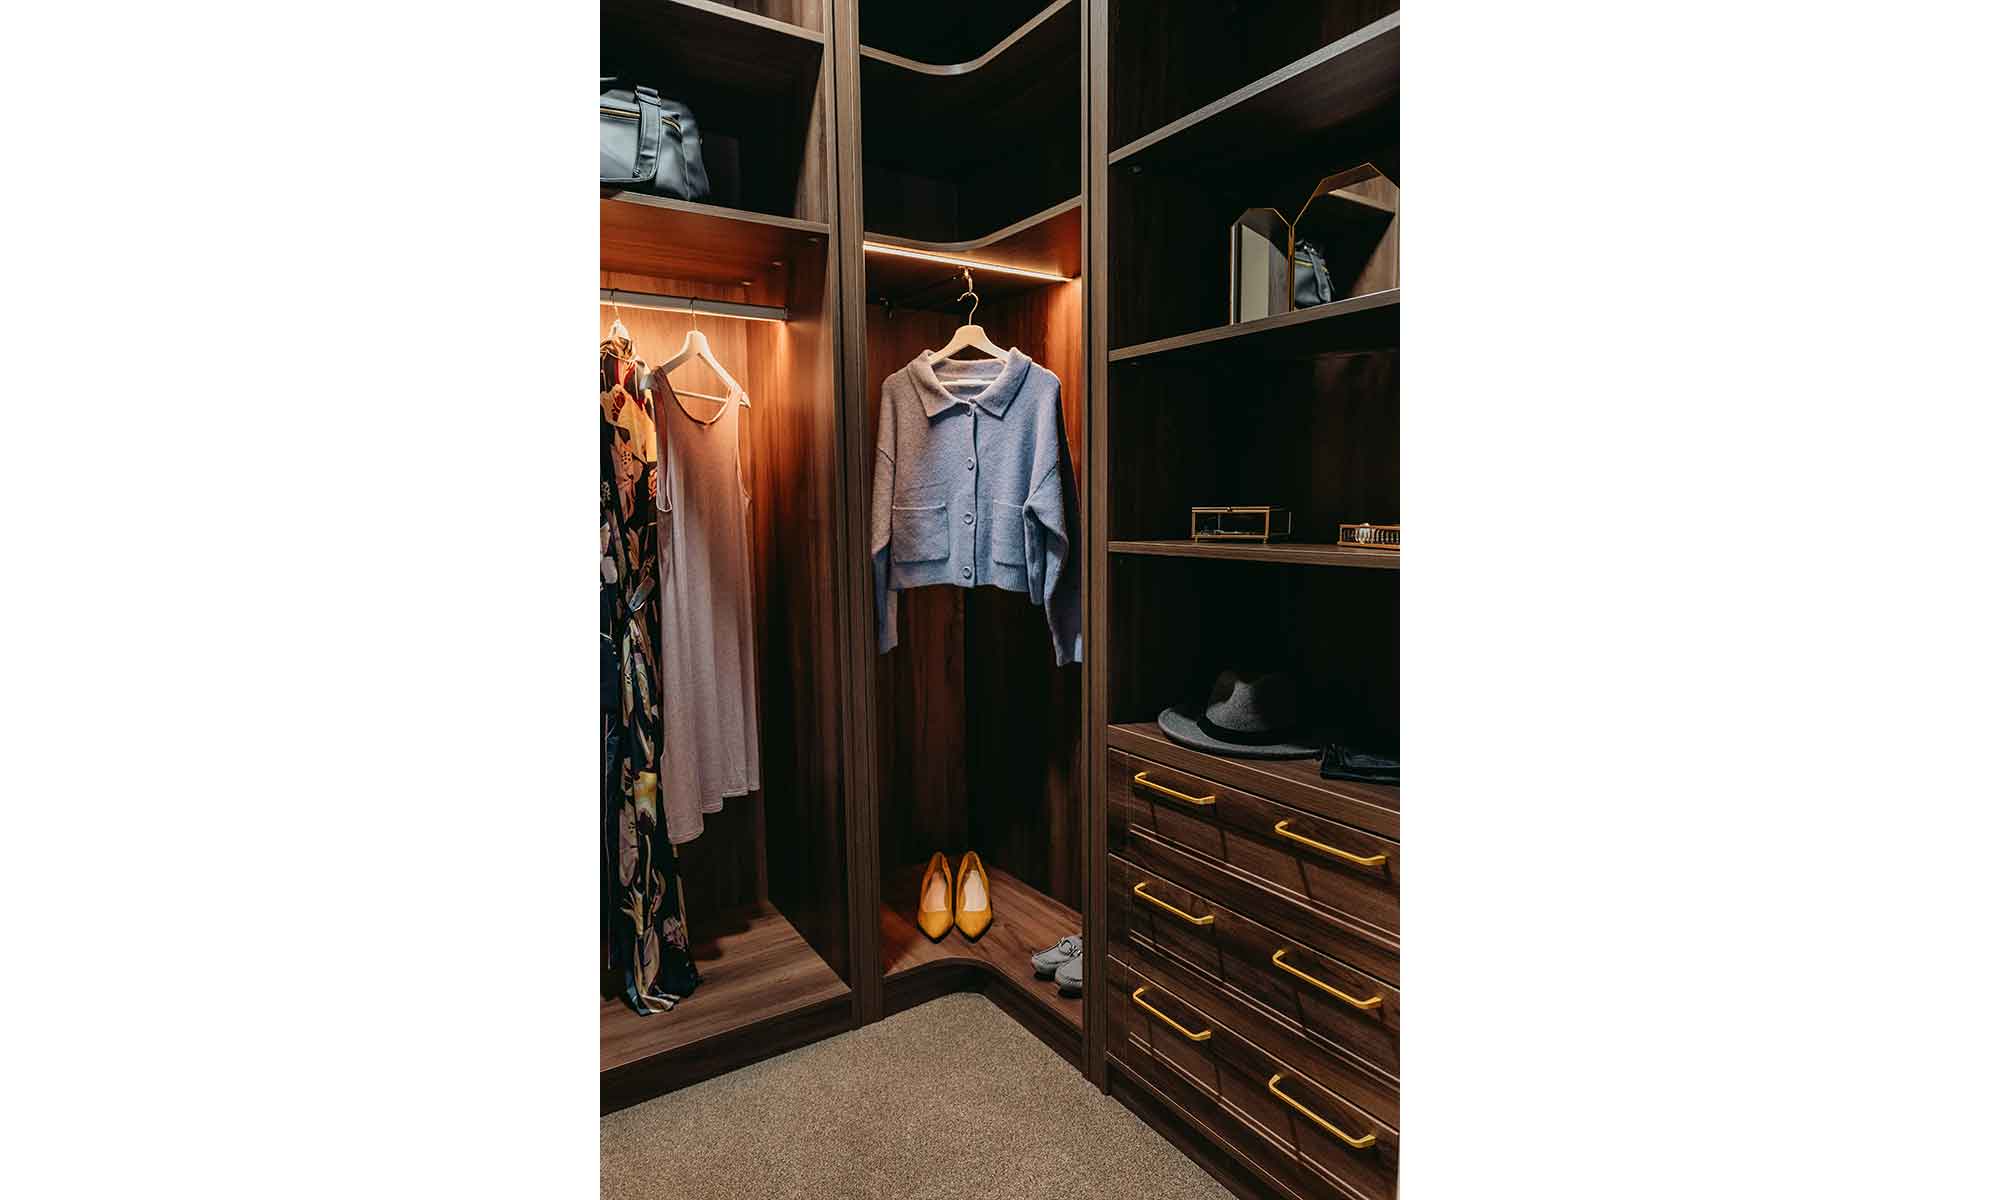 Clothes hanging in a wardrobe